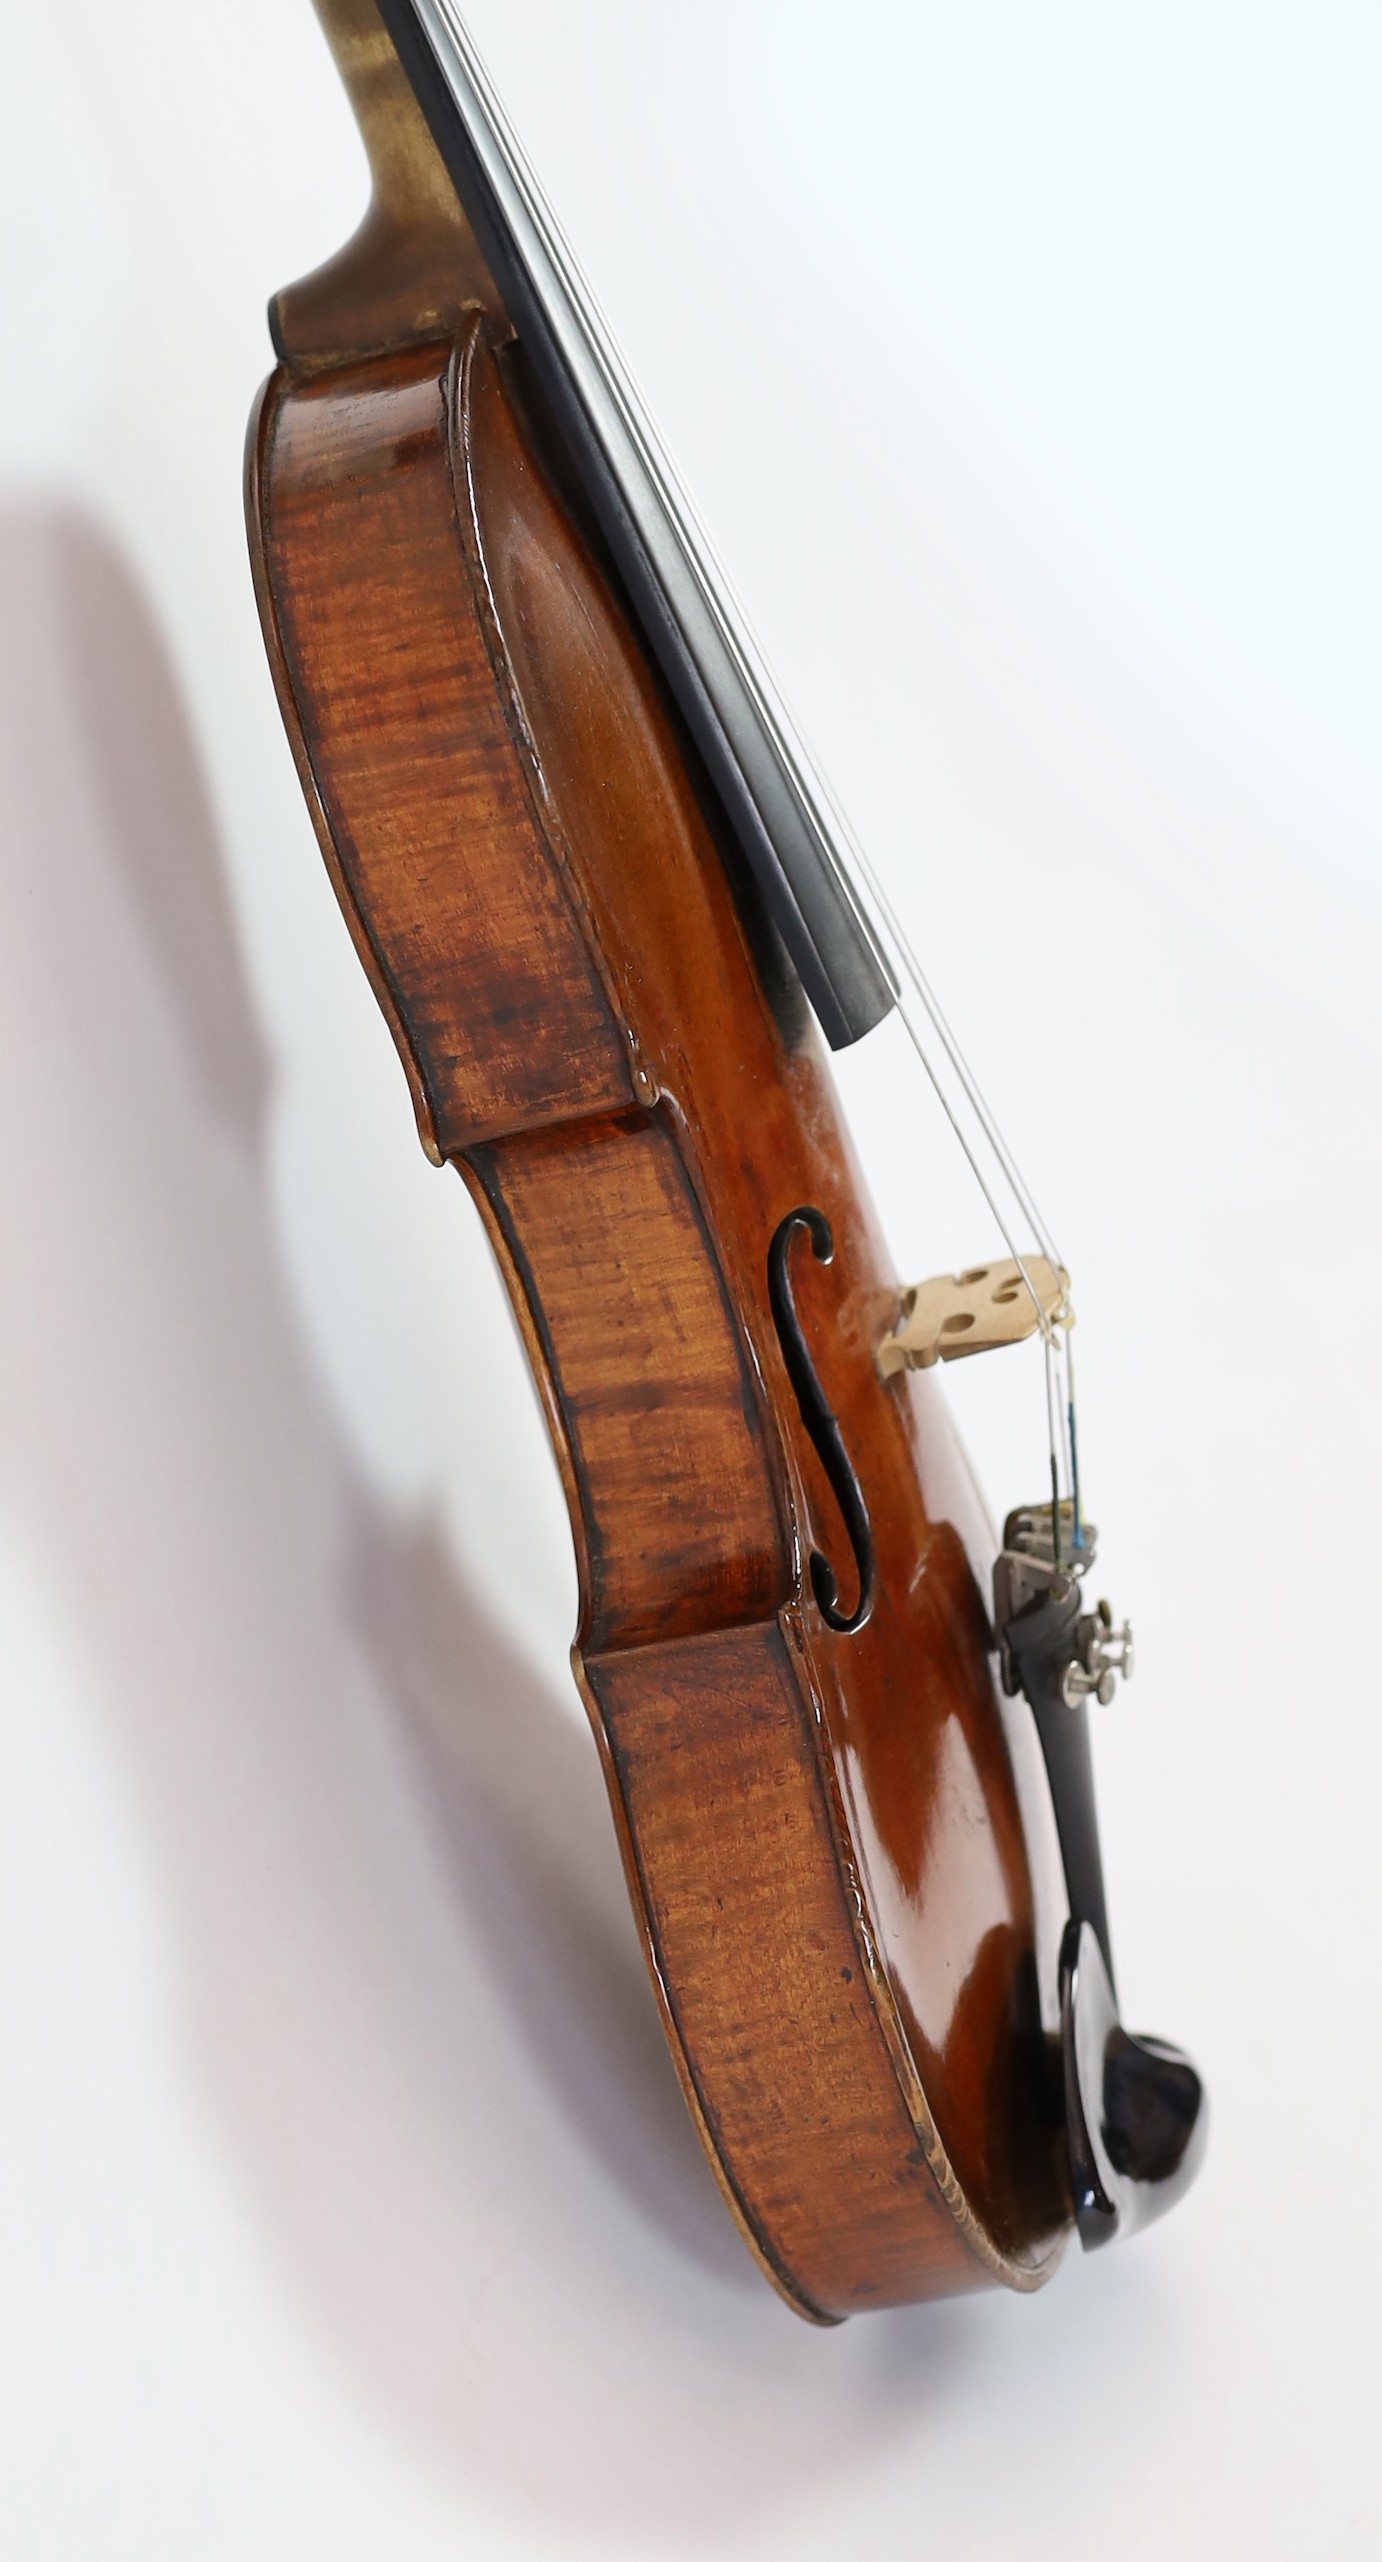 A 19th century violin attributed to Klotz school, unlabelled, the back and sides with medium curl, - Image 7 of 10